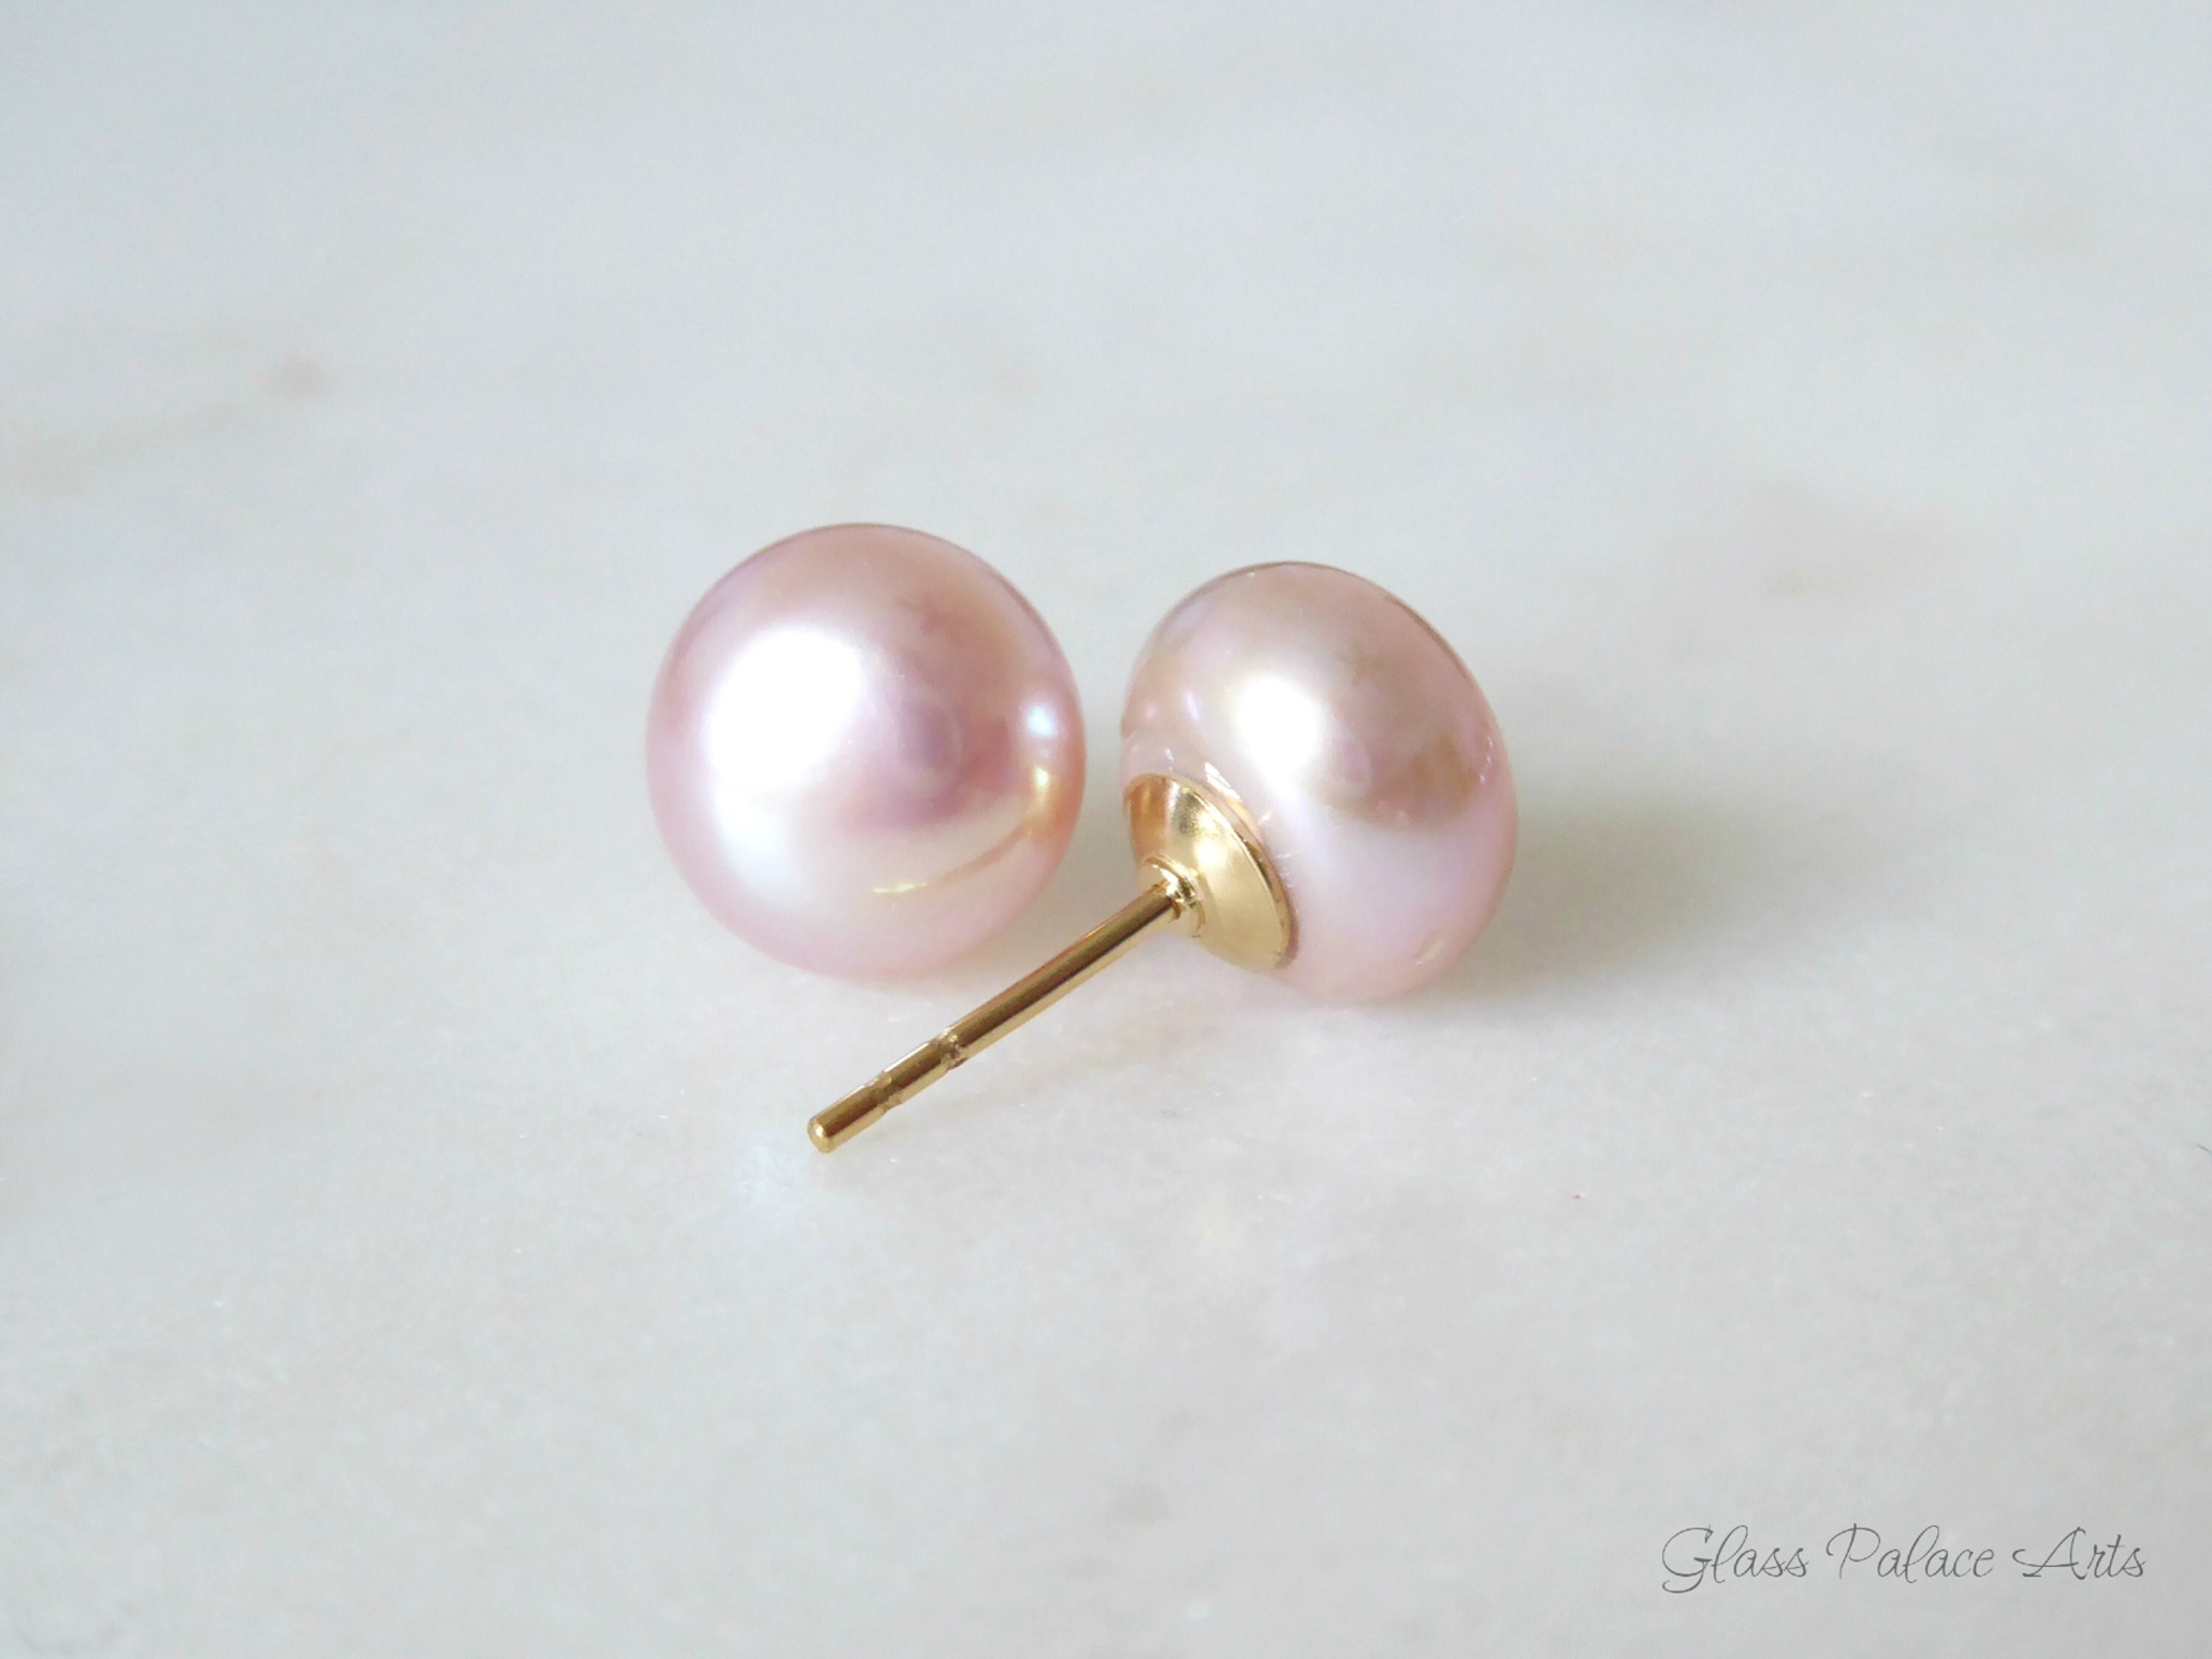 100% Genuine Freshwater PINK Pearl Earrings Studs 14k Gold Plated NEW 